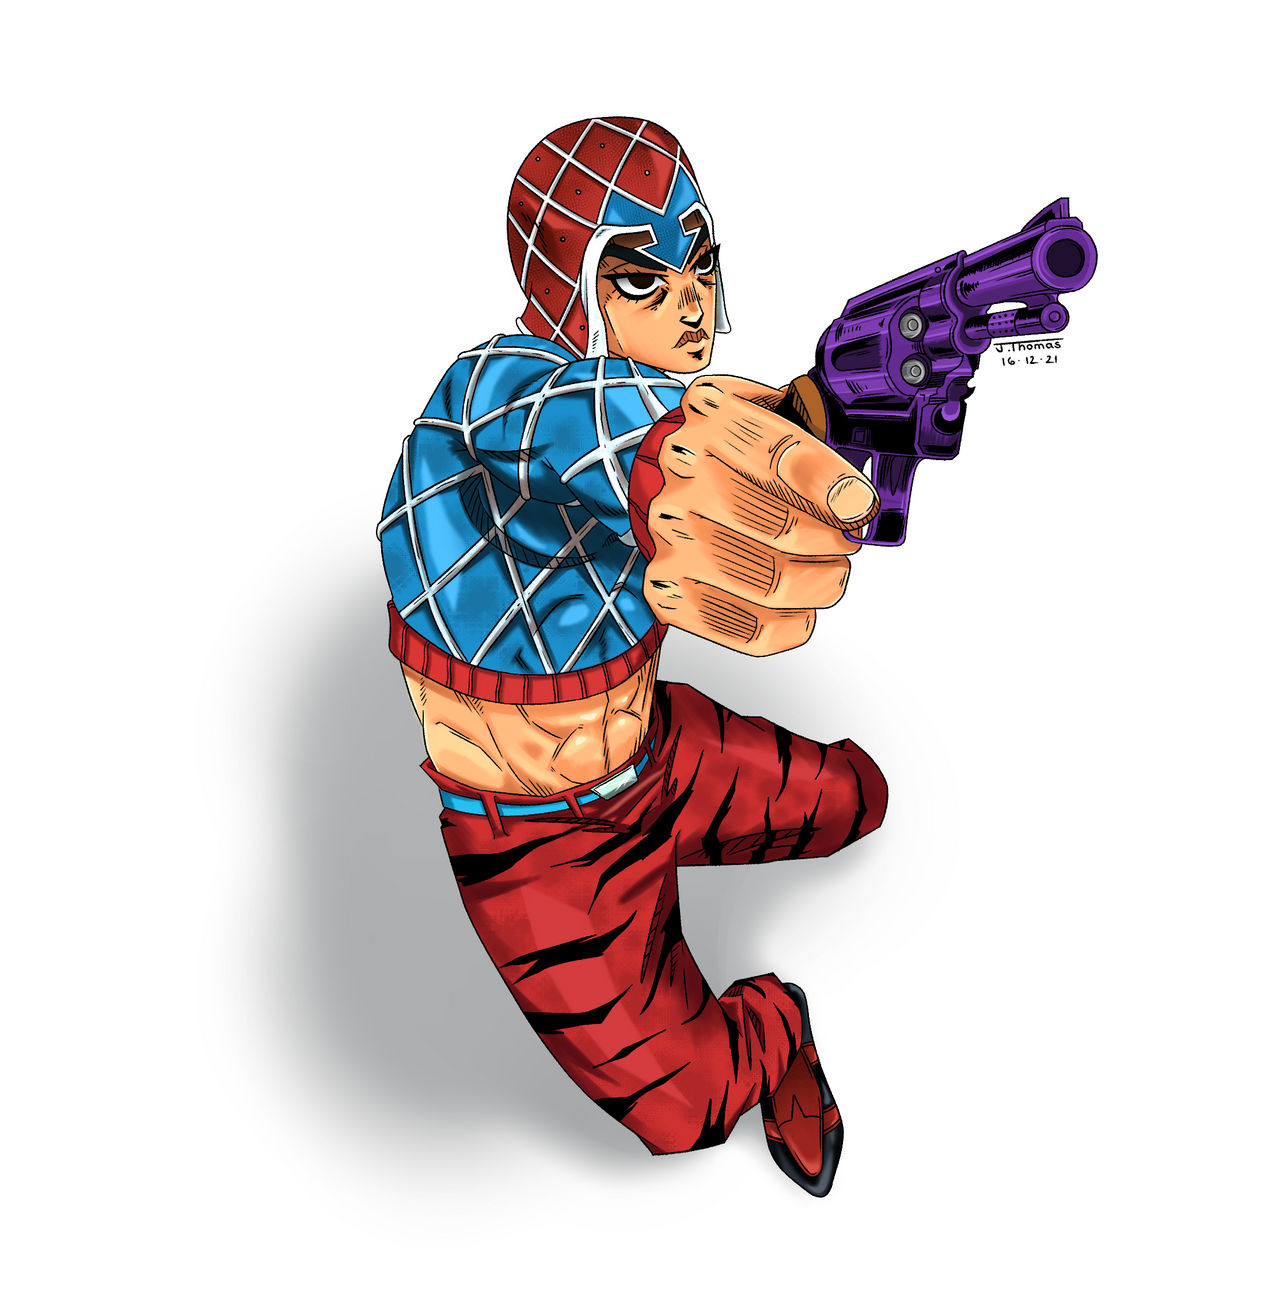 Ono.ri.na - Guido Mista I loved drawing him, the pose